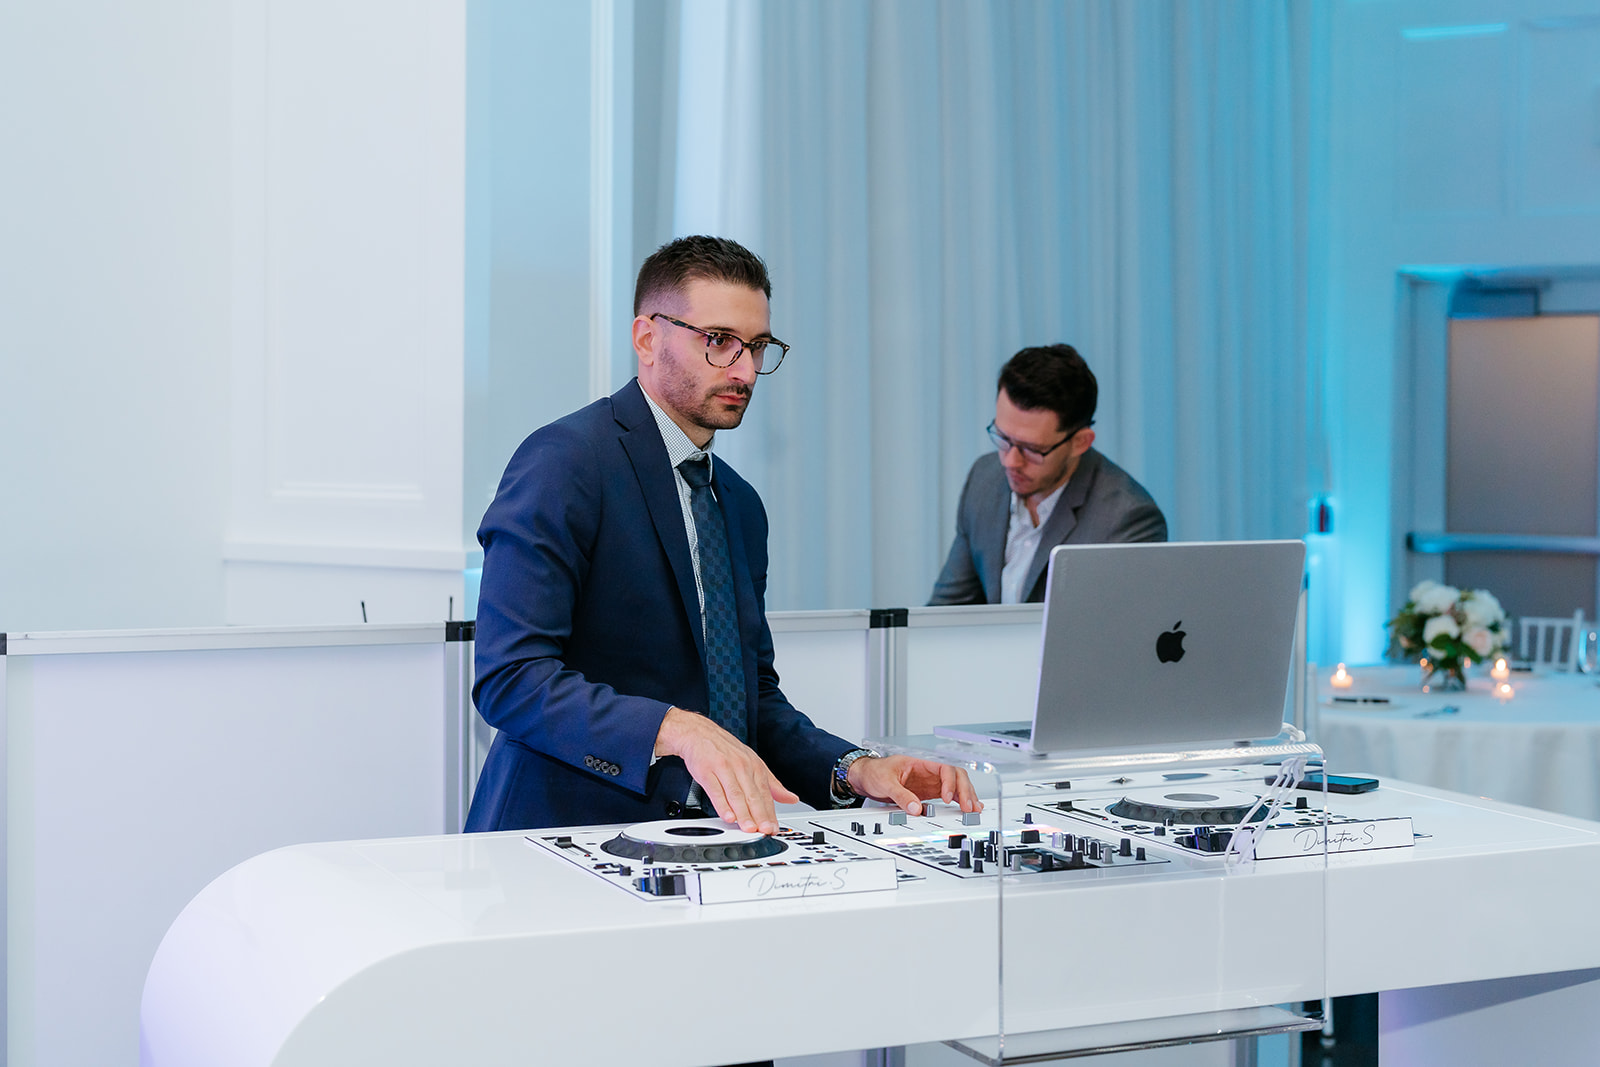 A man in a suit operating dj equipment at an event, with another man in the background working on a laptop.